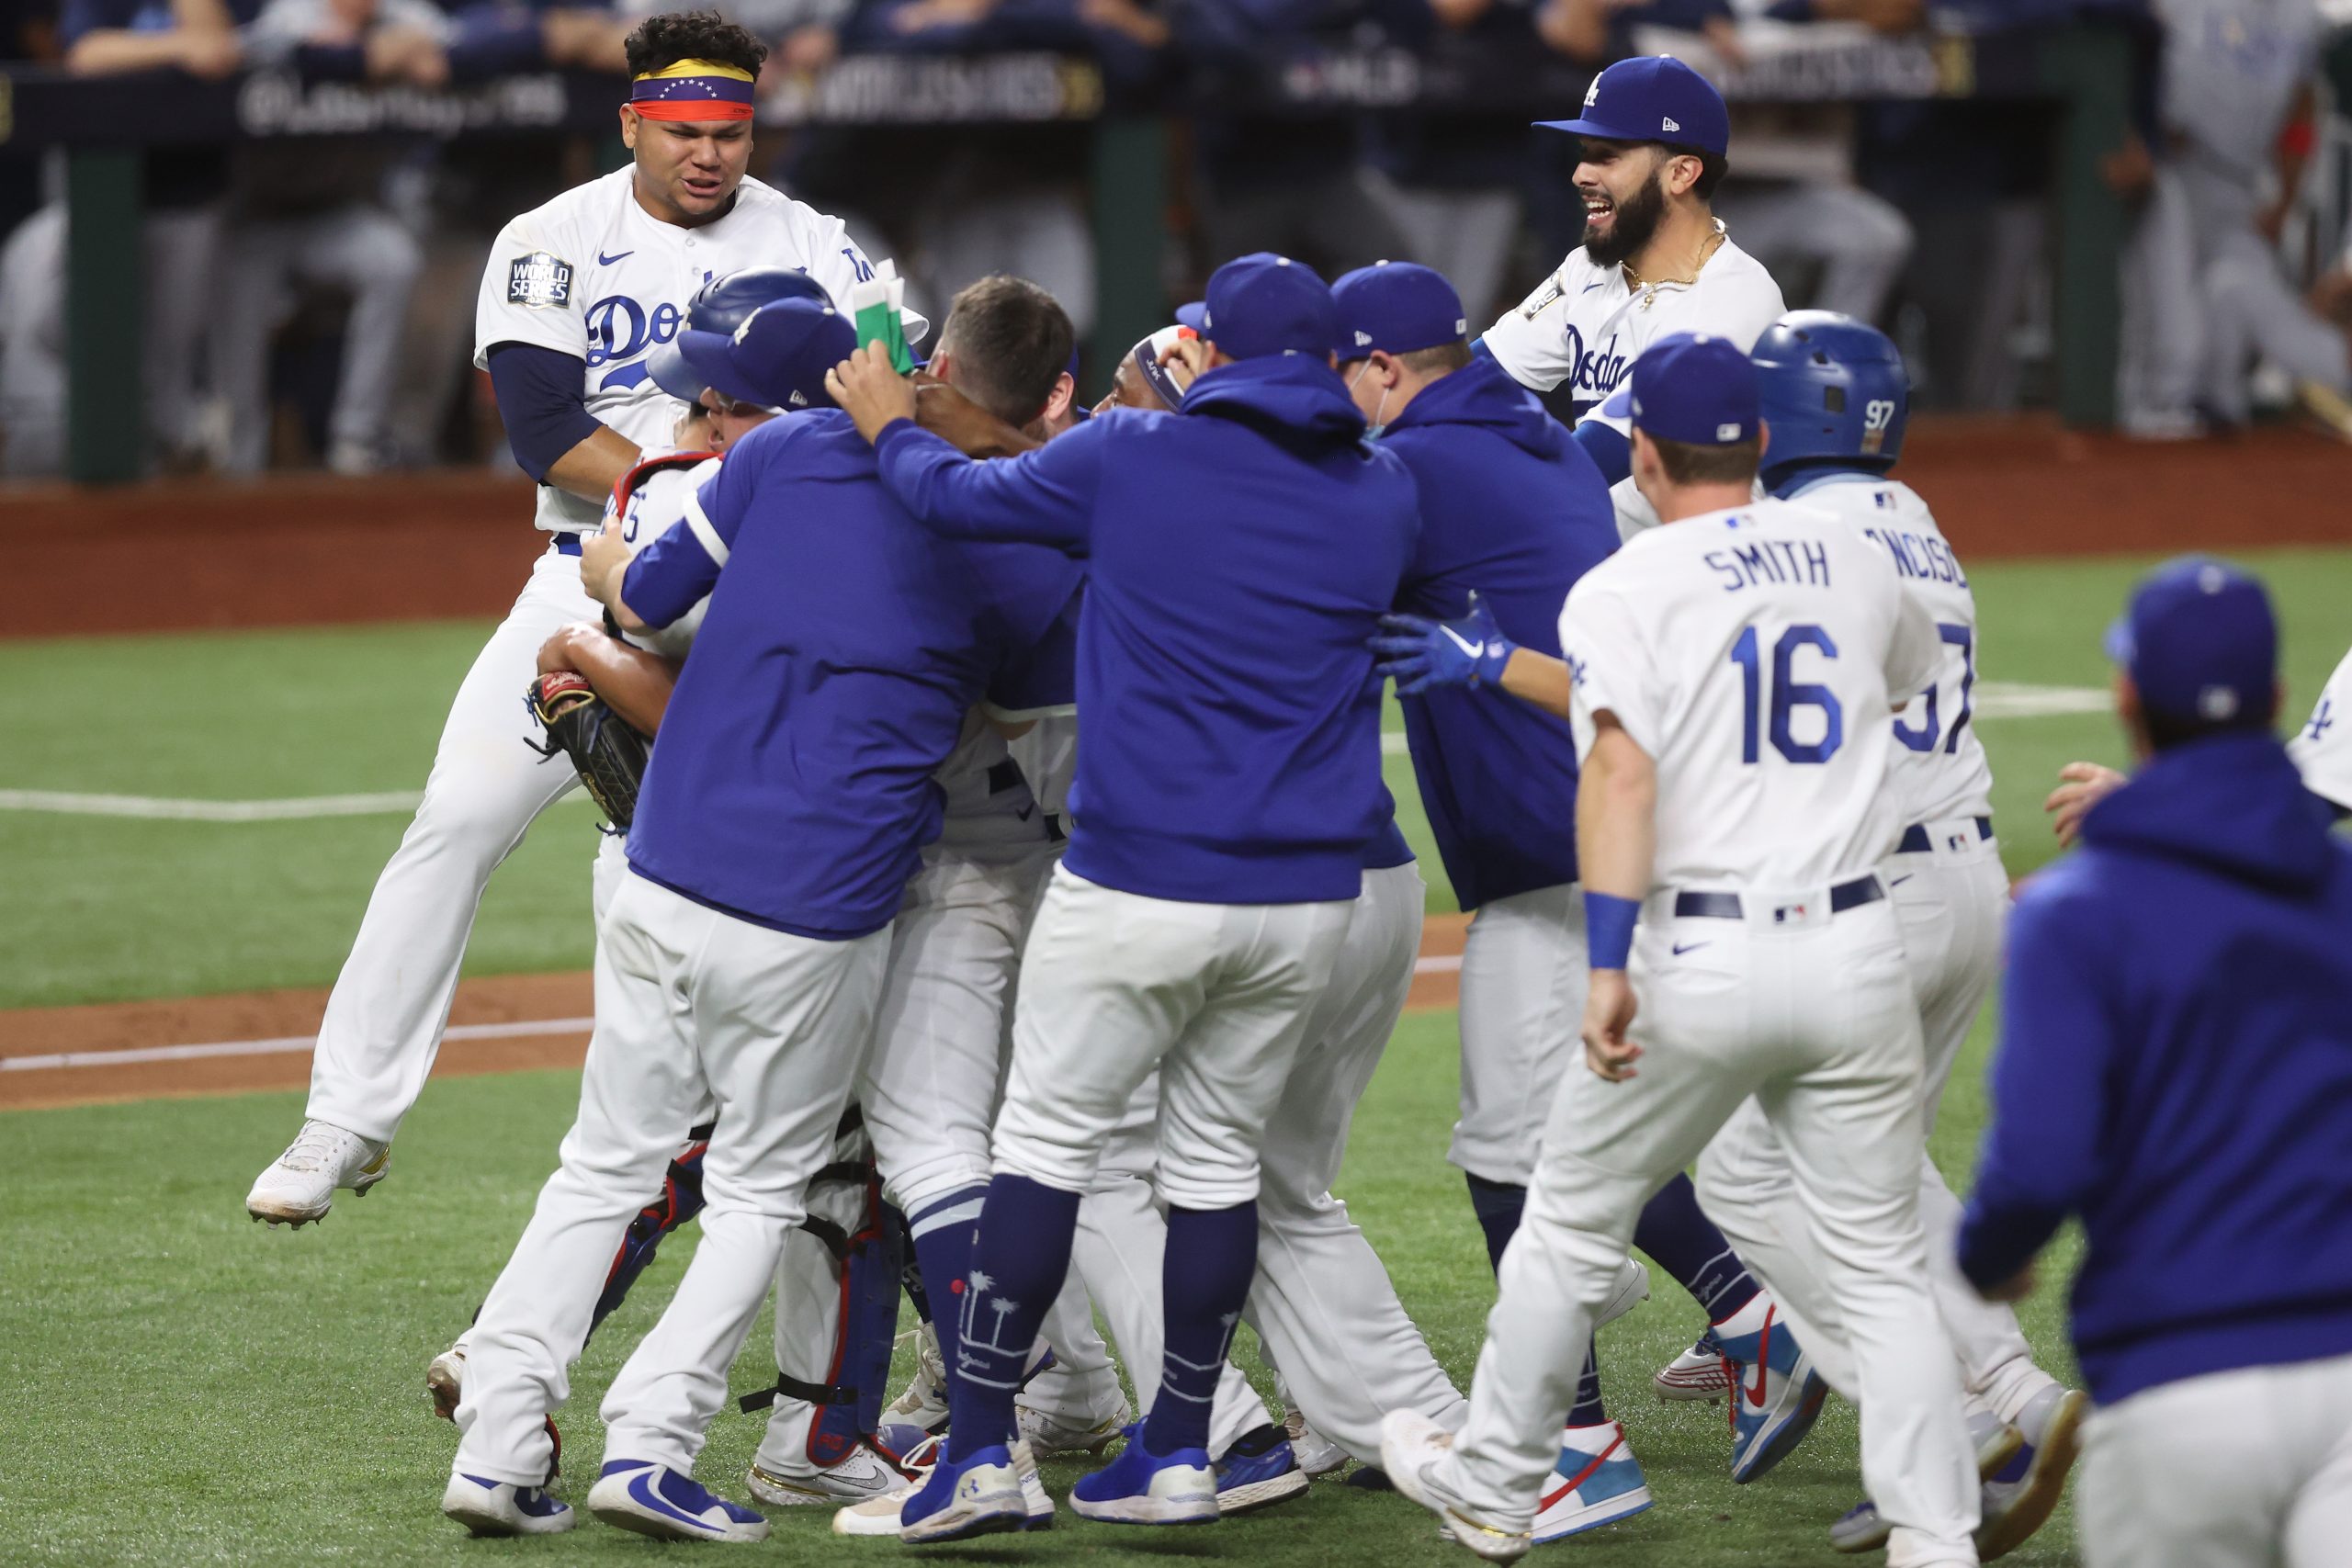 Tampa Bay Rays are headed to the World Series after winning the